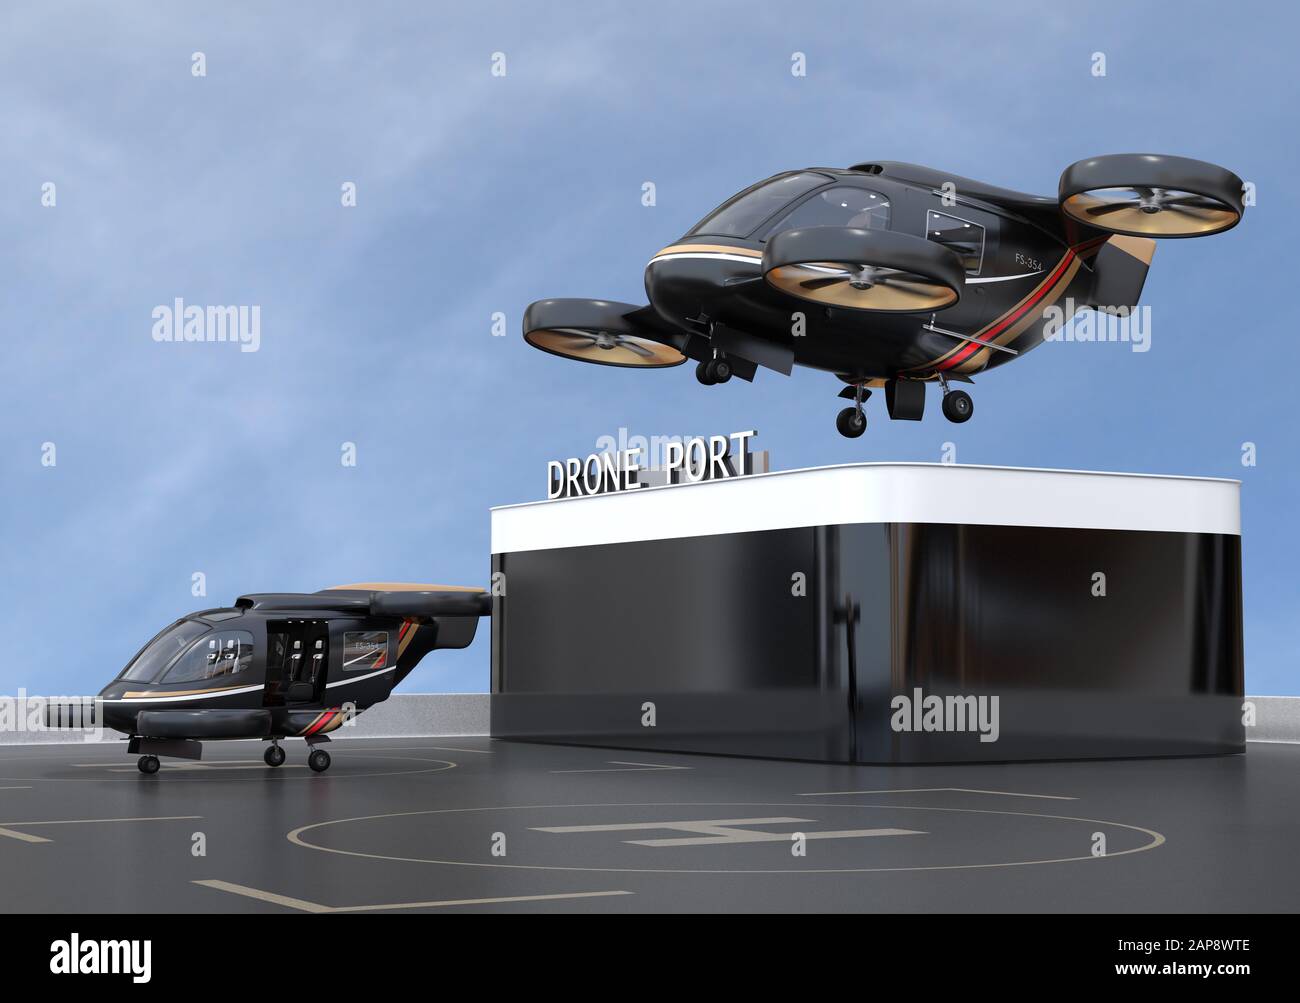 Black flying car (air taxi) takeoff from or land to Drone Port. 3D rendering image. Stock Photo